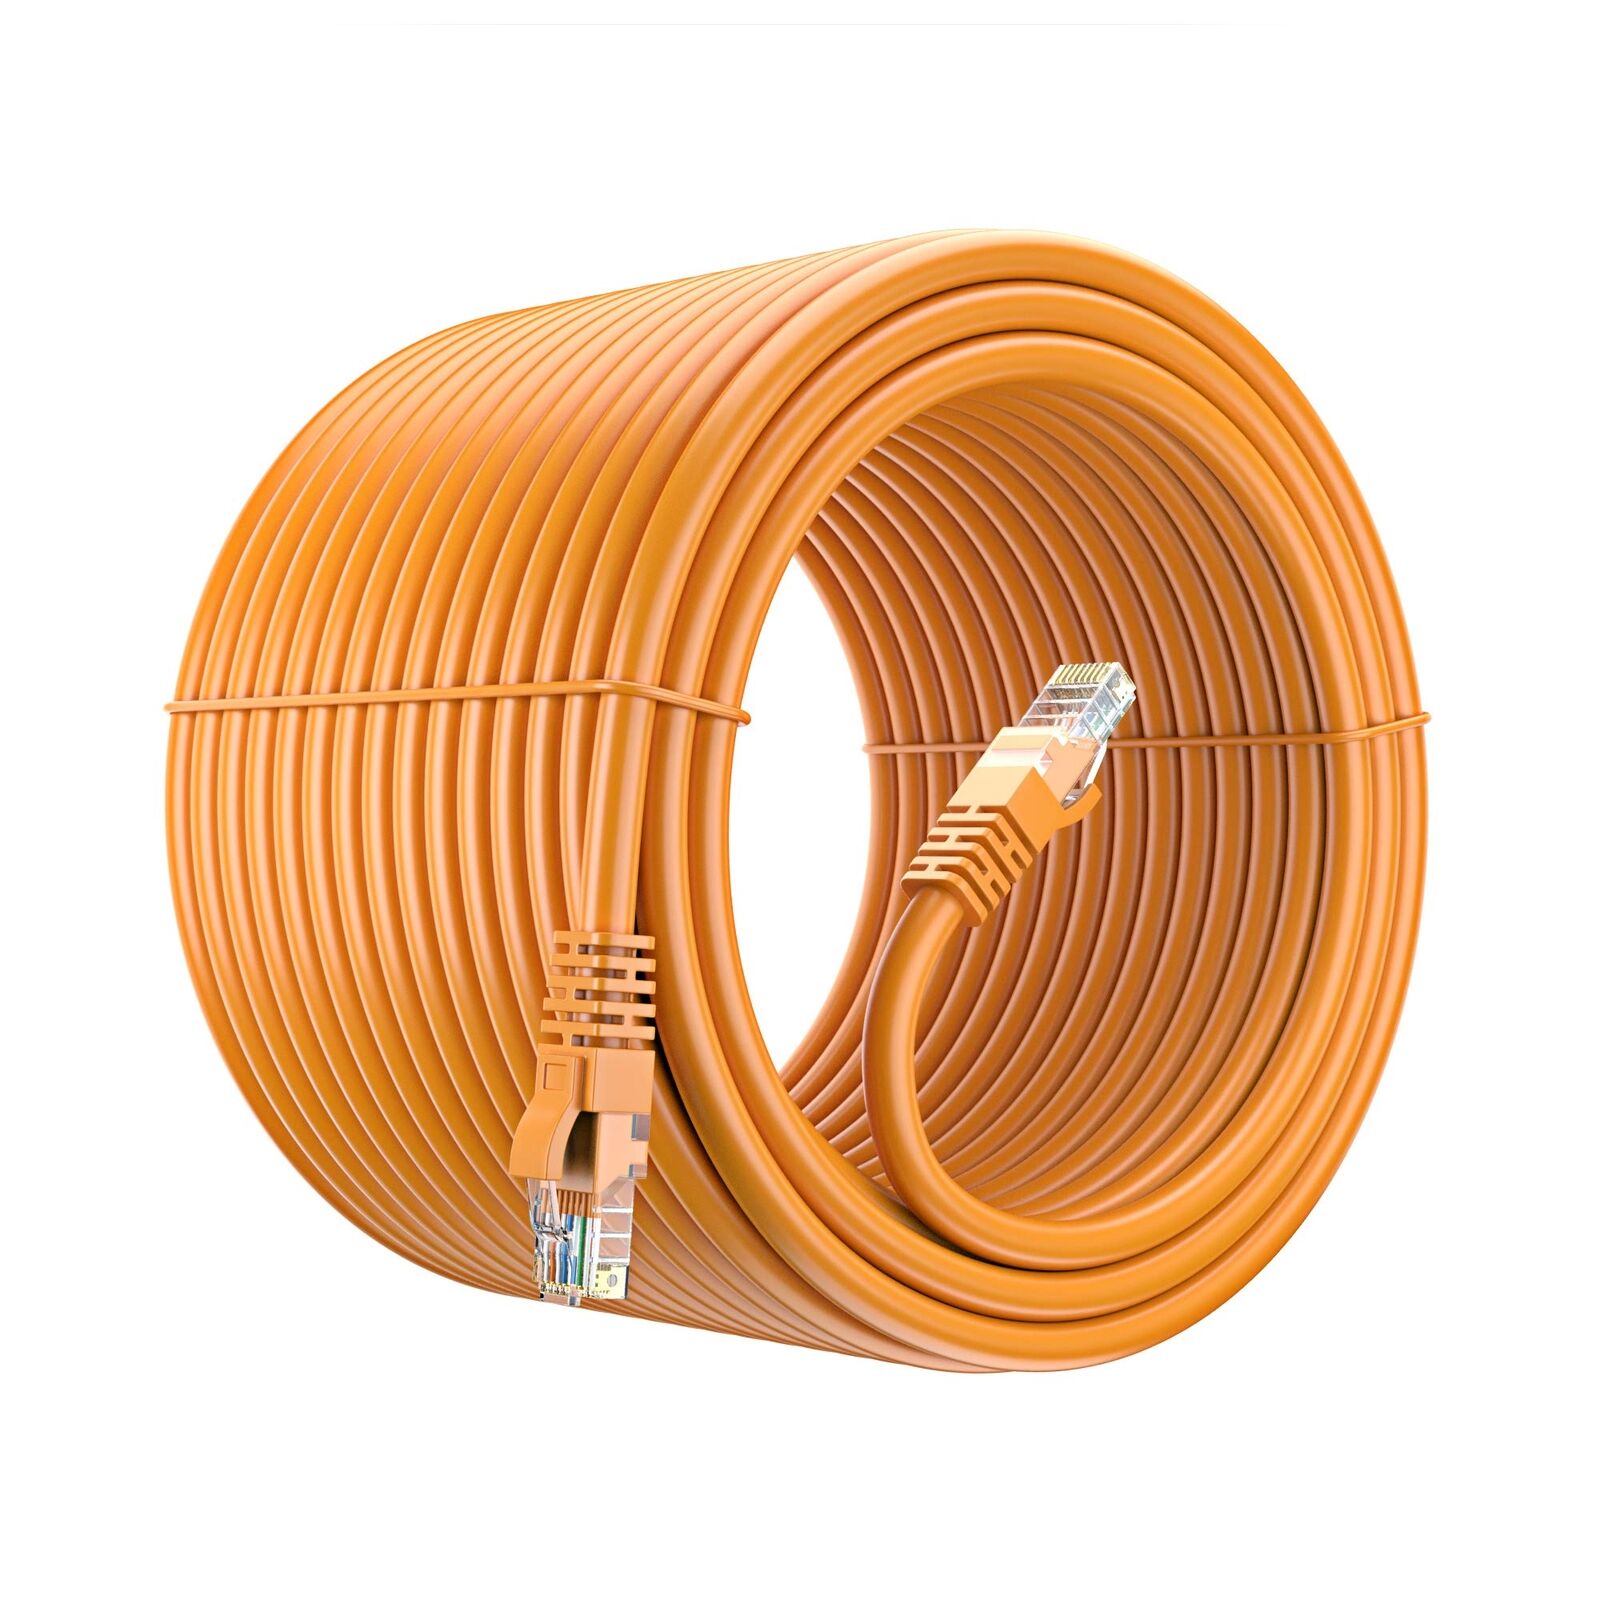 Maximm Cat 6 Ethernet Cable 300 Ft, 100% Pure Copper, Cat6 Cable LAN Cable, I...